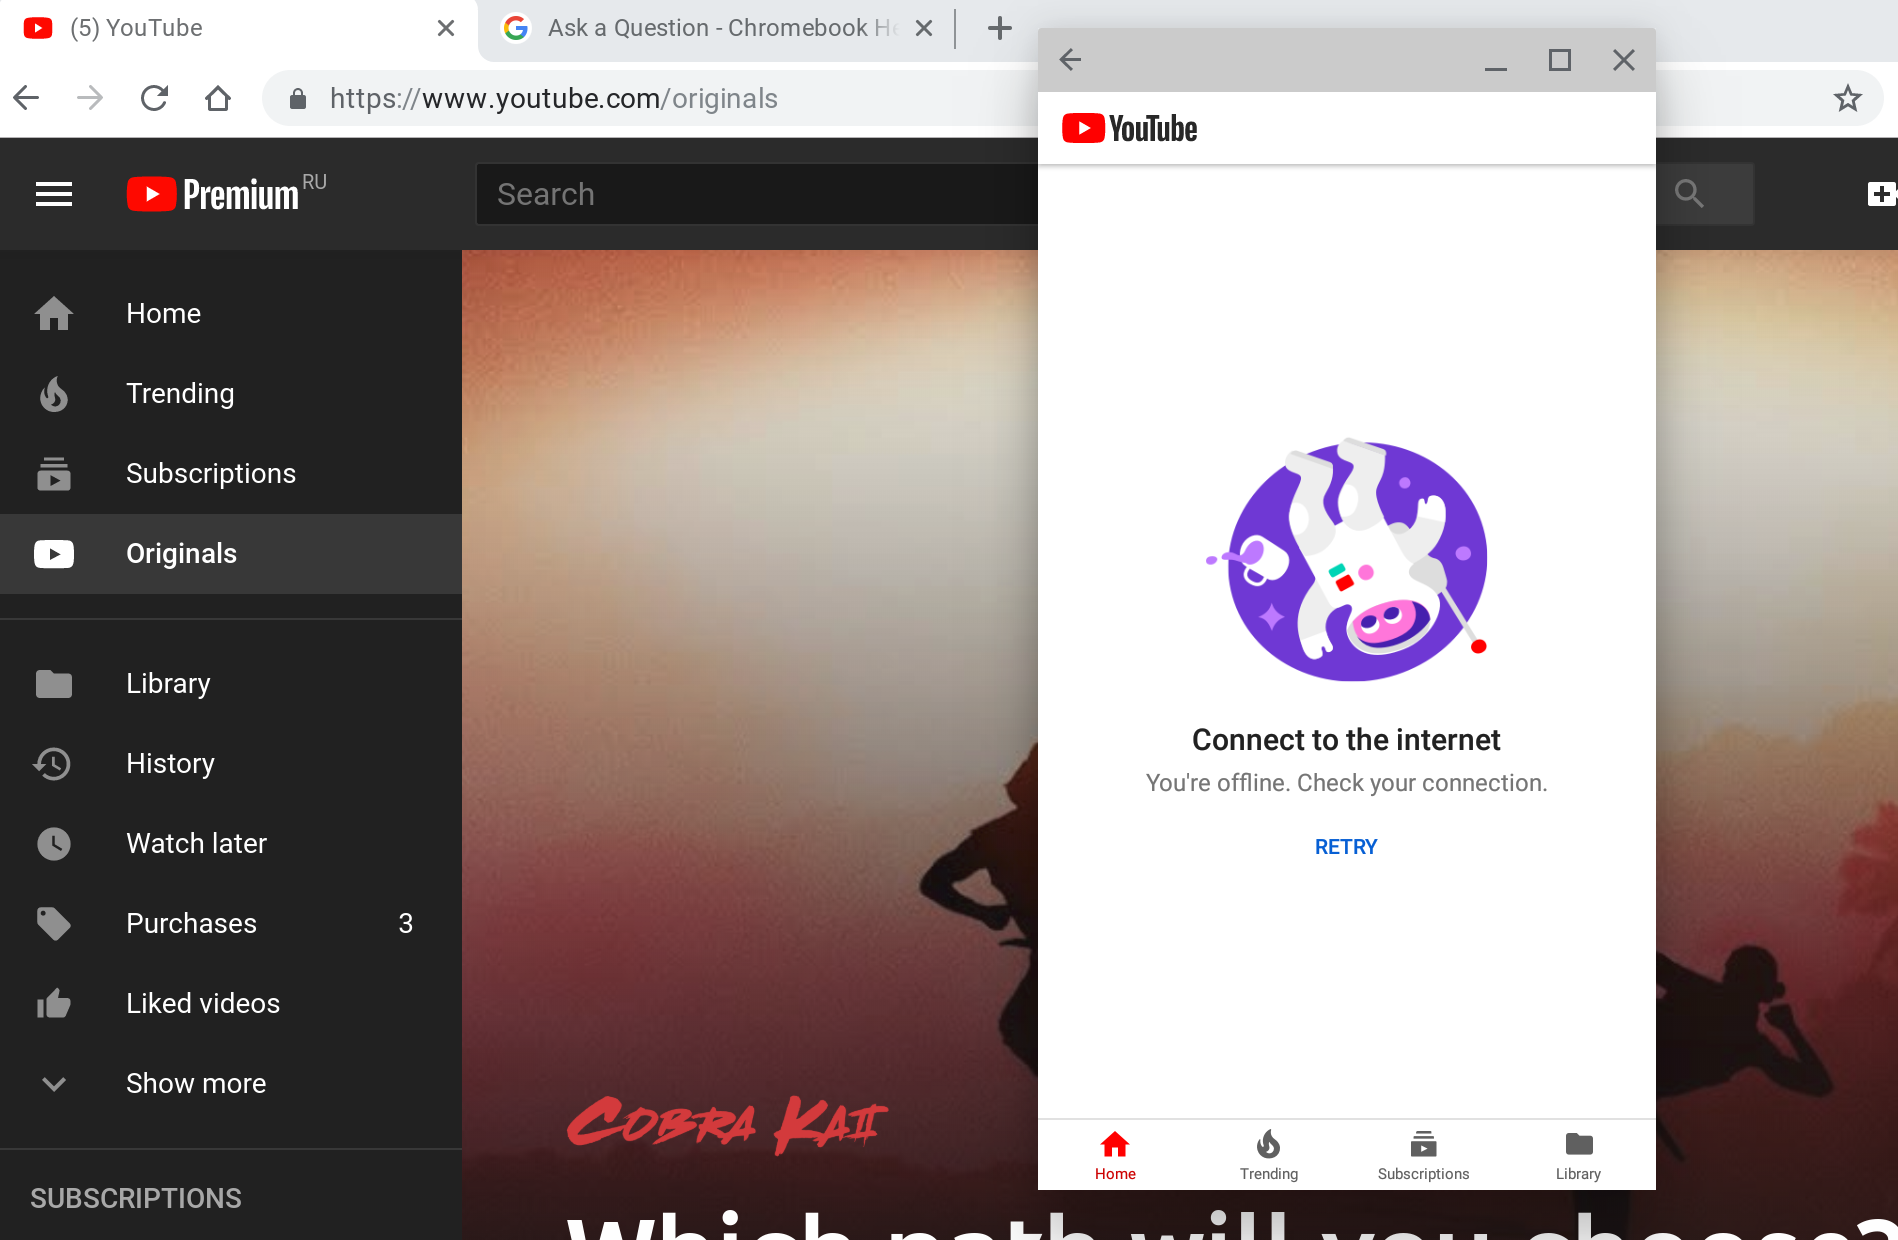 Youtube Android App Has No Internet Connection Chromebook Community